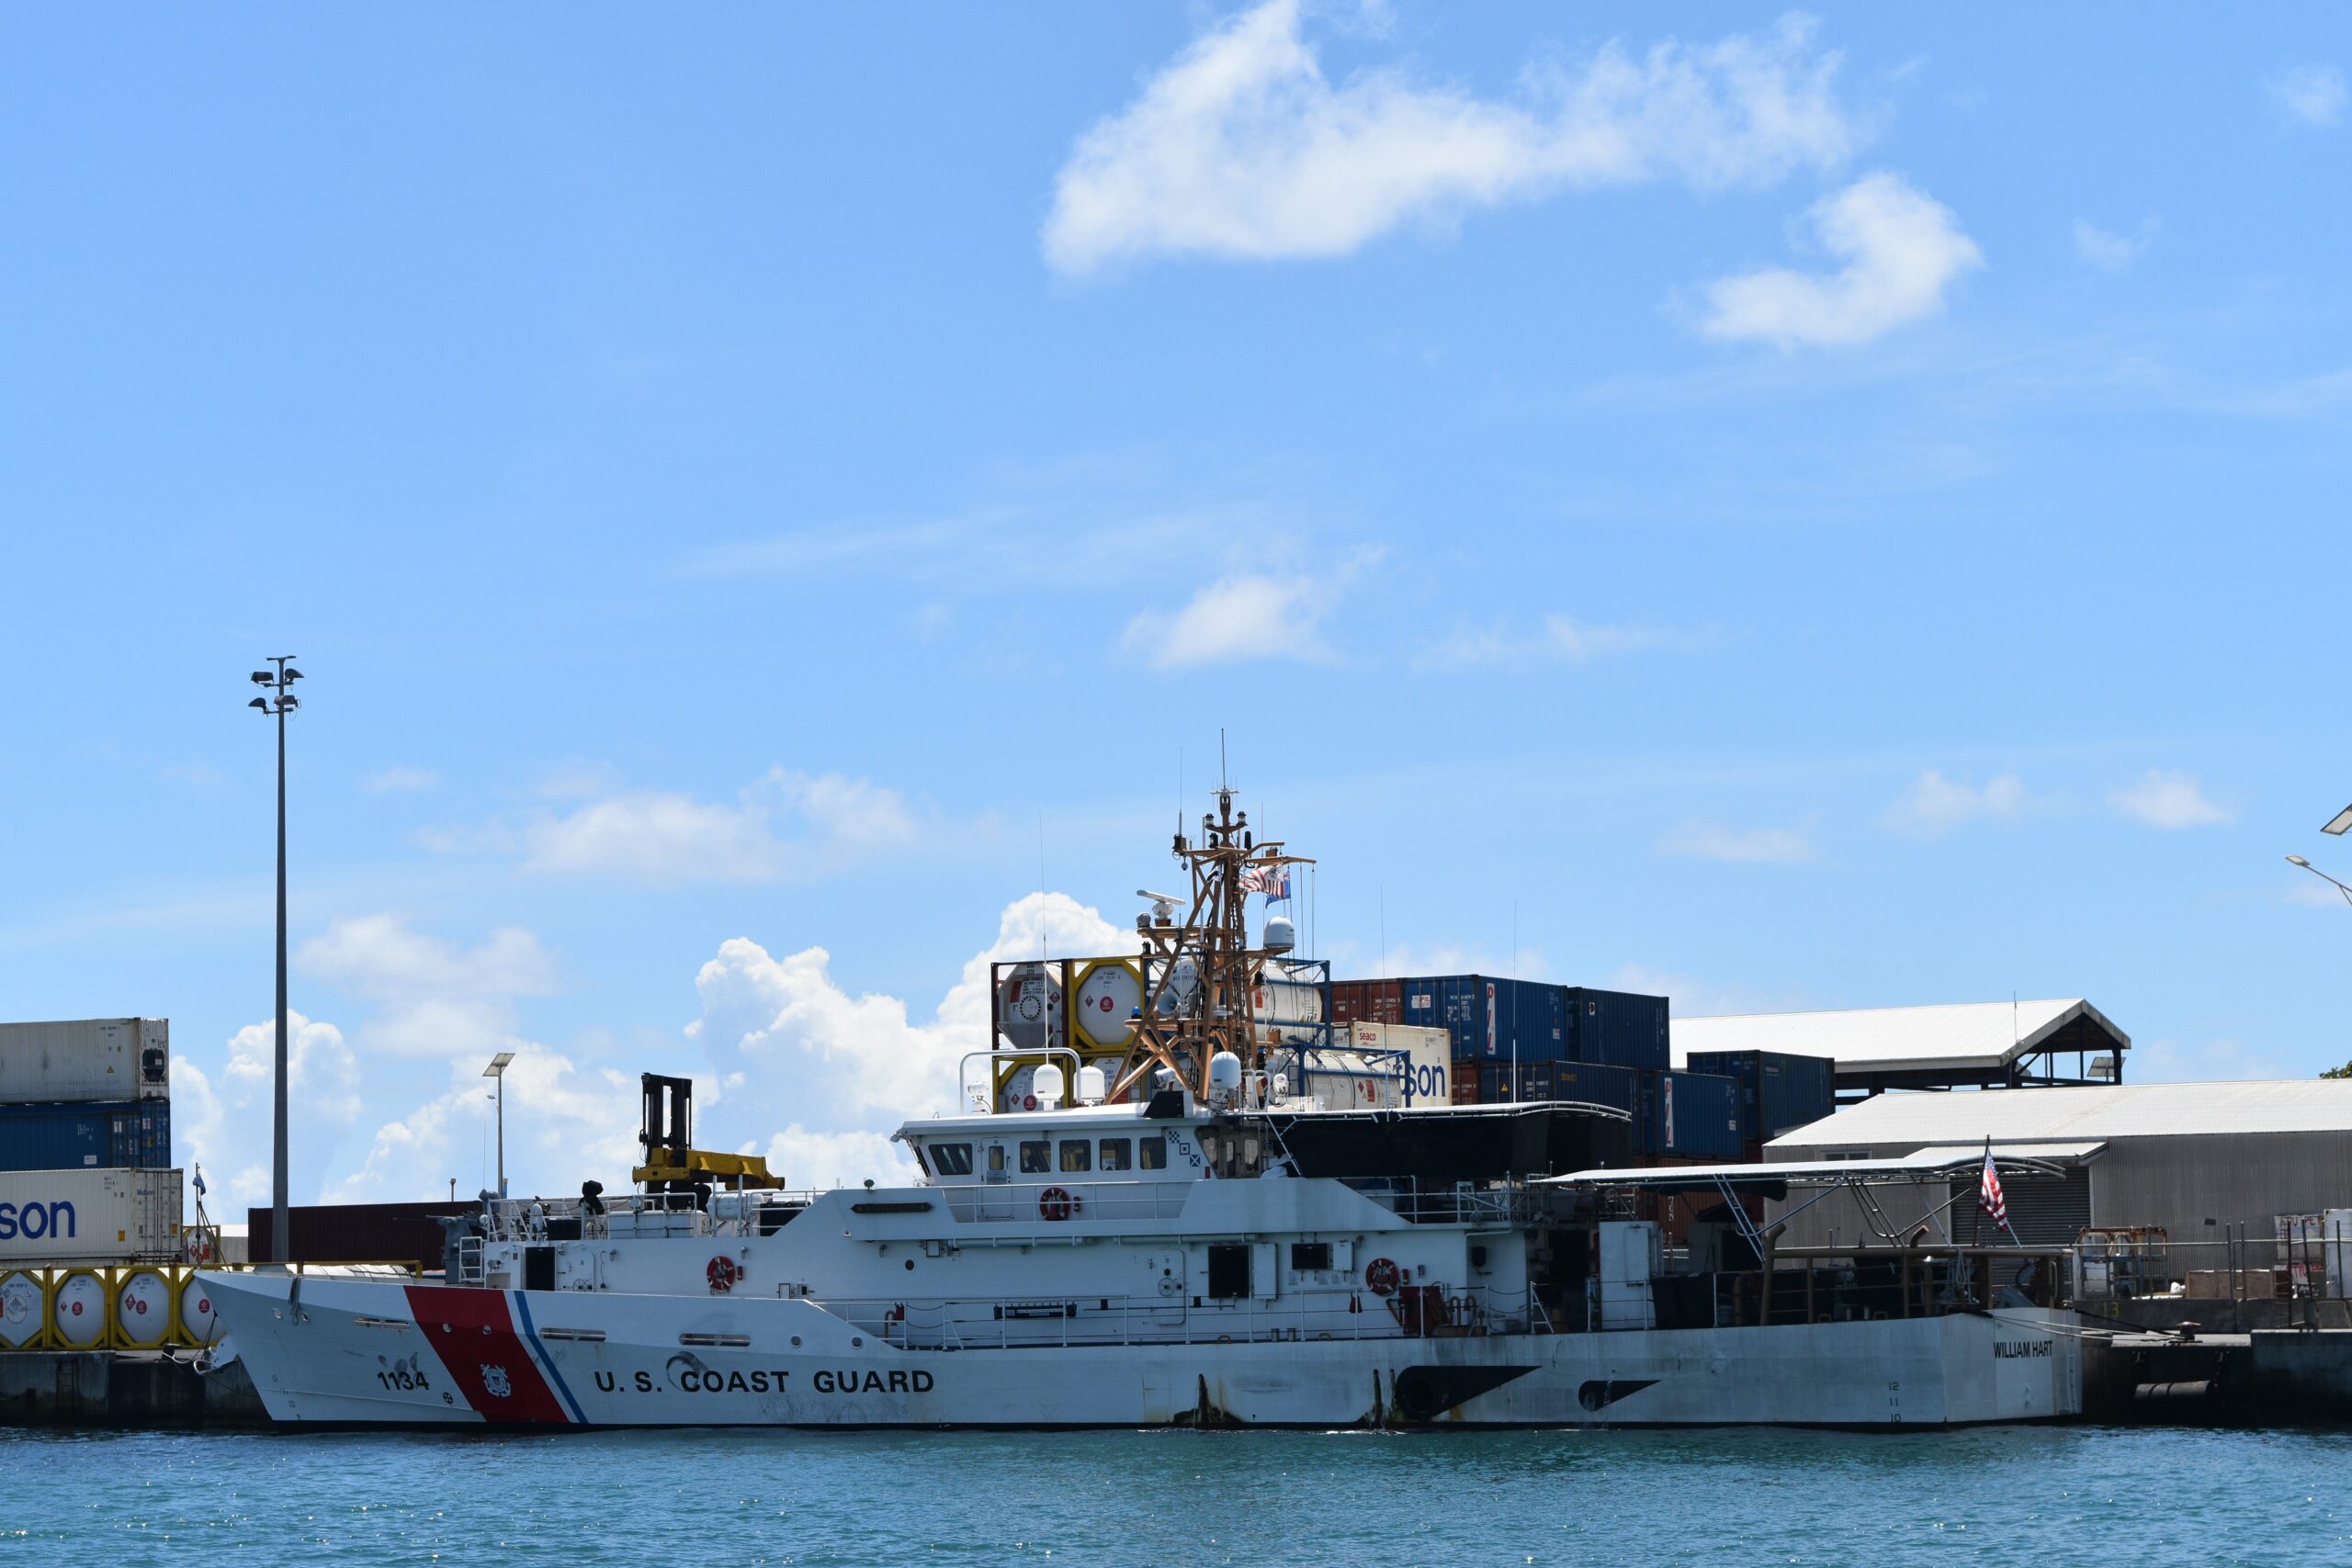 US Coast Guard vessel ‘not involved’ in cocaine bust operation